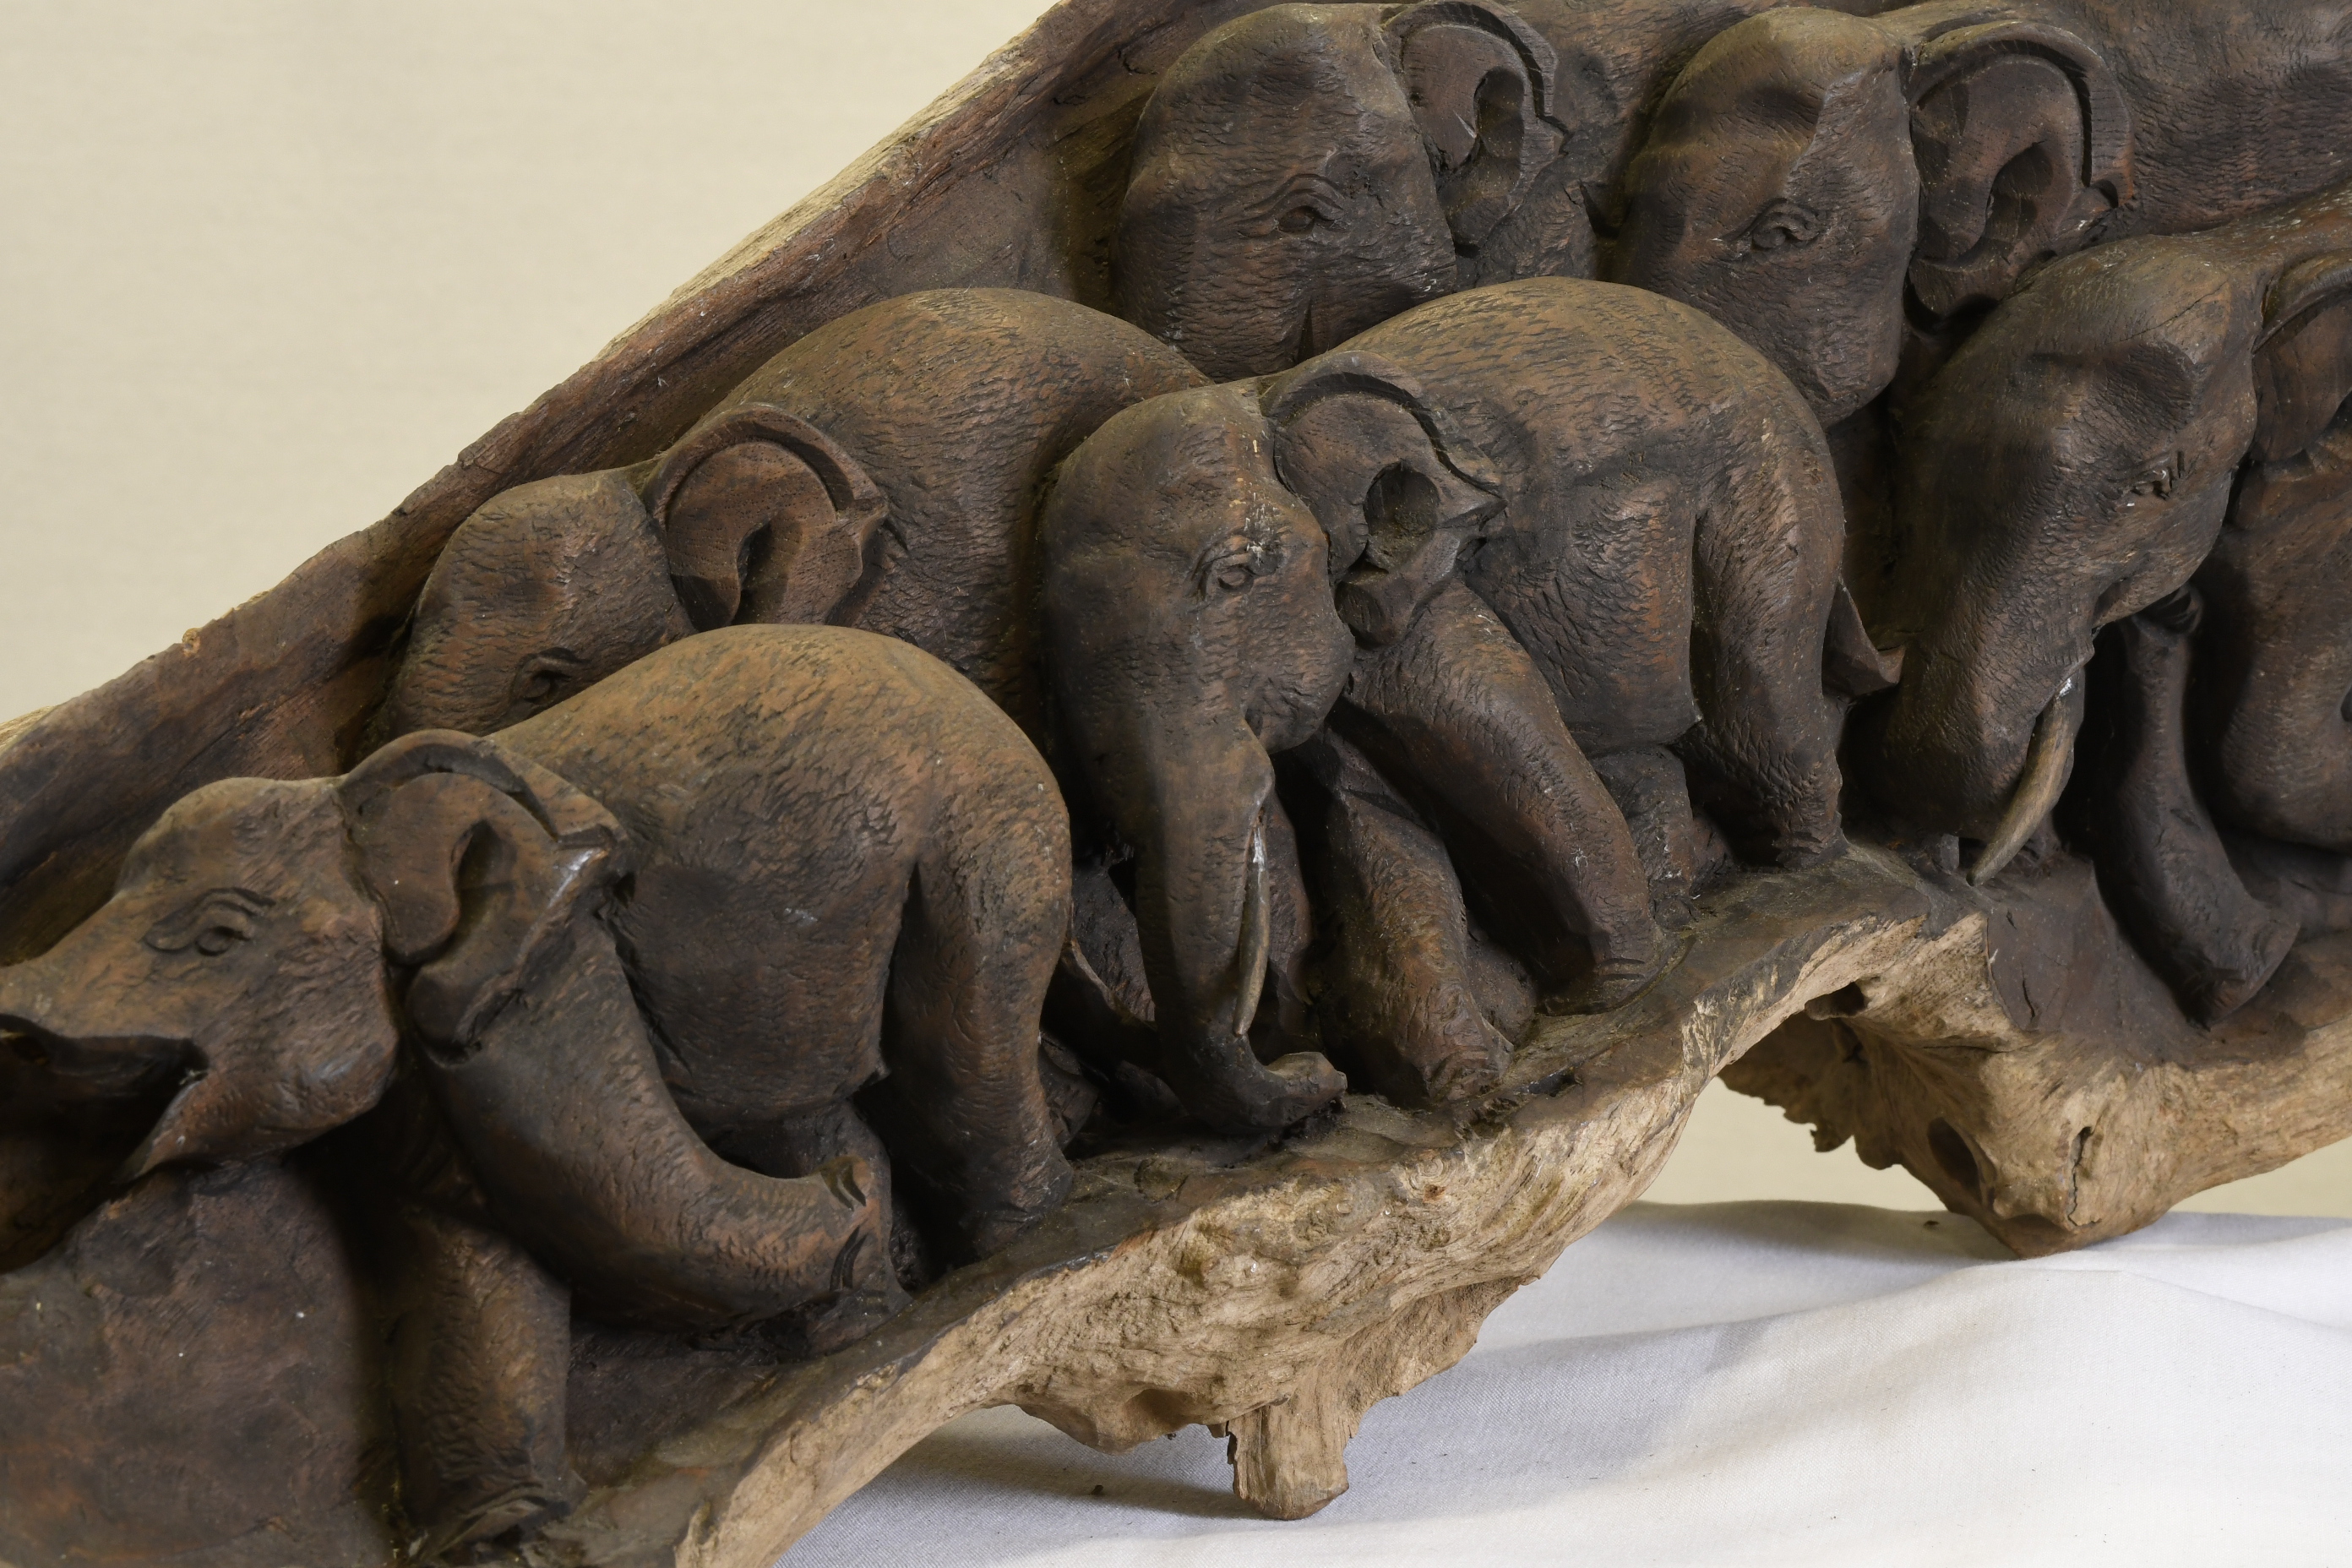 Amazing 4ft Hand carved Wooden Elephant Sculpture. Carved from One Piece of Wood. - Image 8 of 9